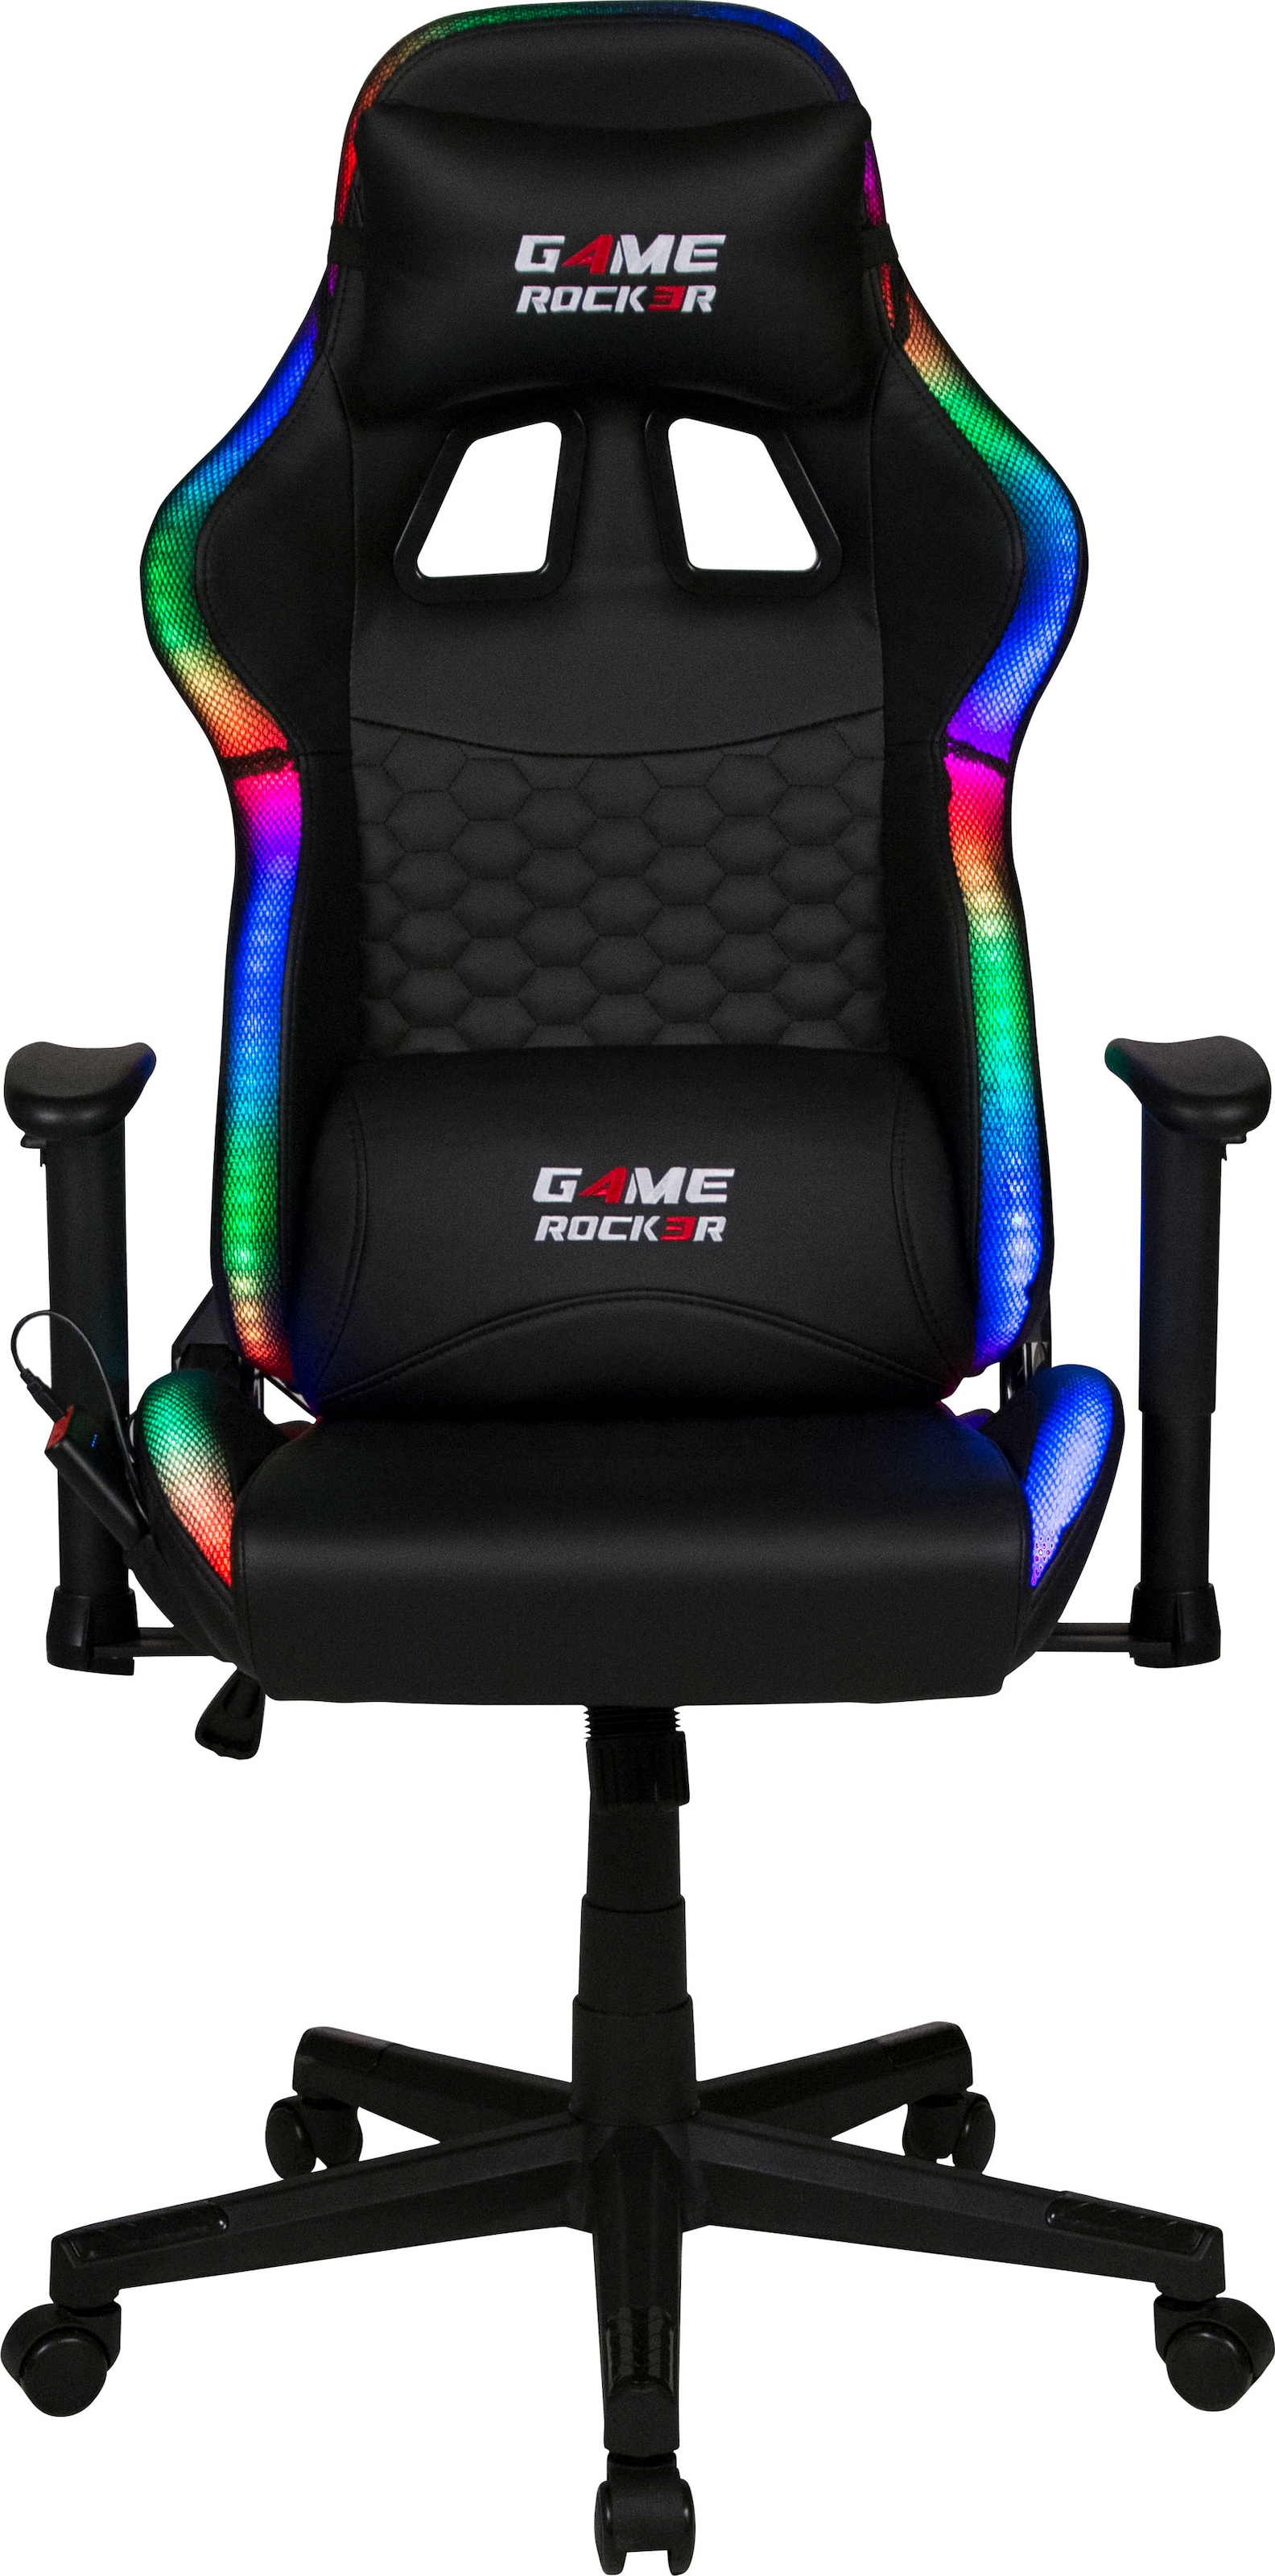 Duo Collection Chefsessel »Game-Rocker G-10 LED«, Kunstleder-Netzstoff, Gaming Chair mit LED Wechselbeleuchtung